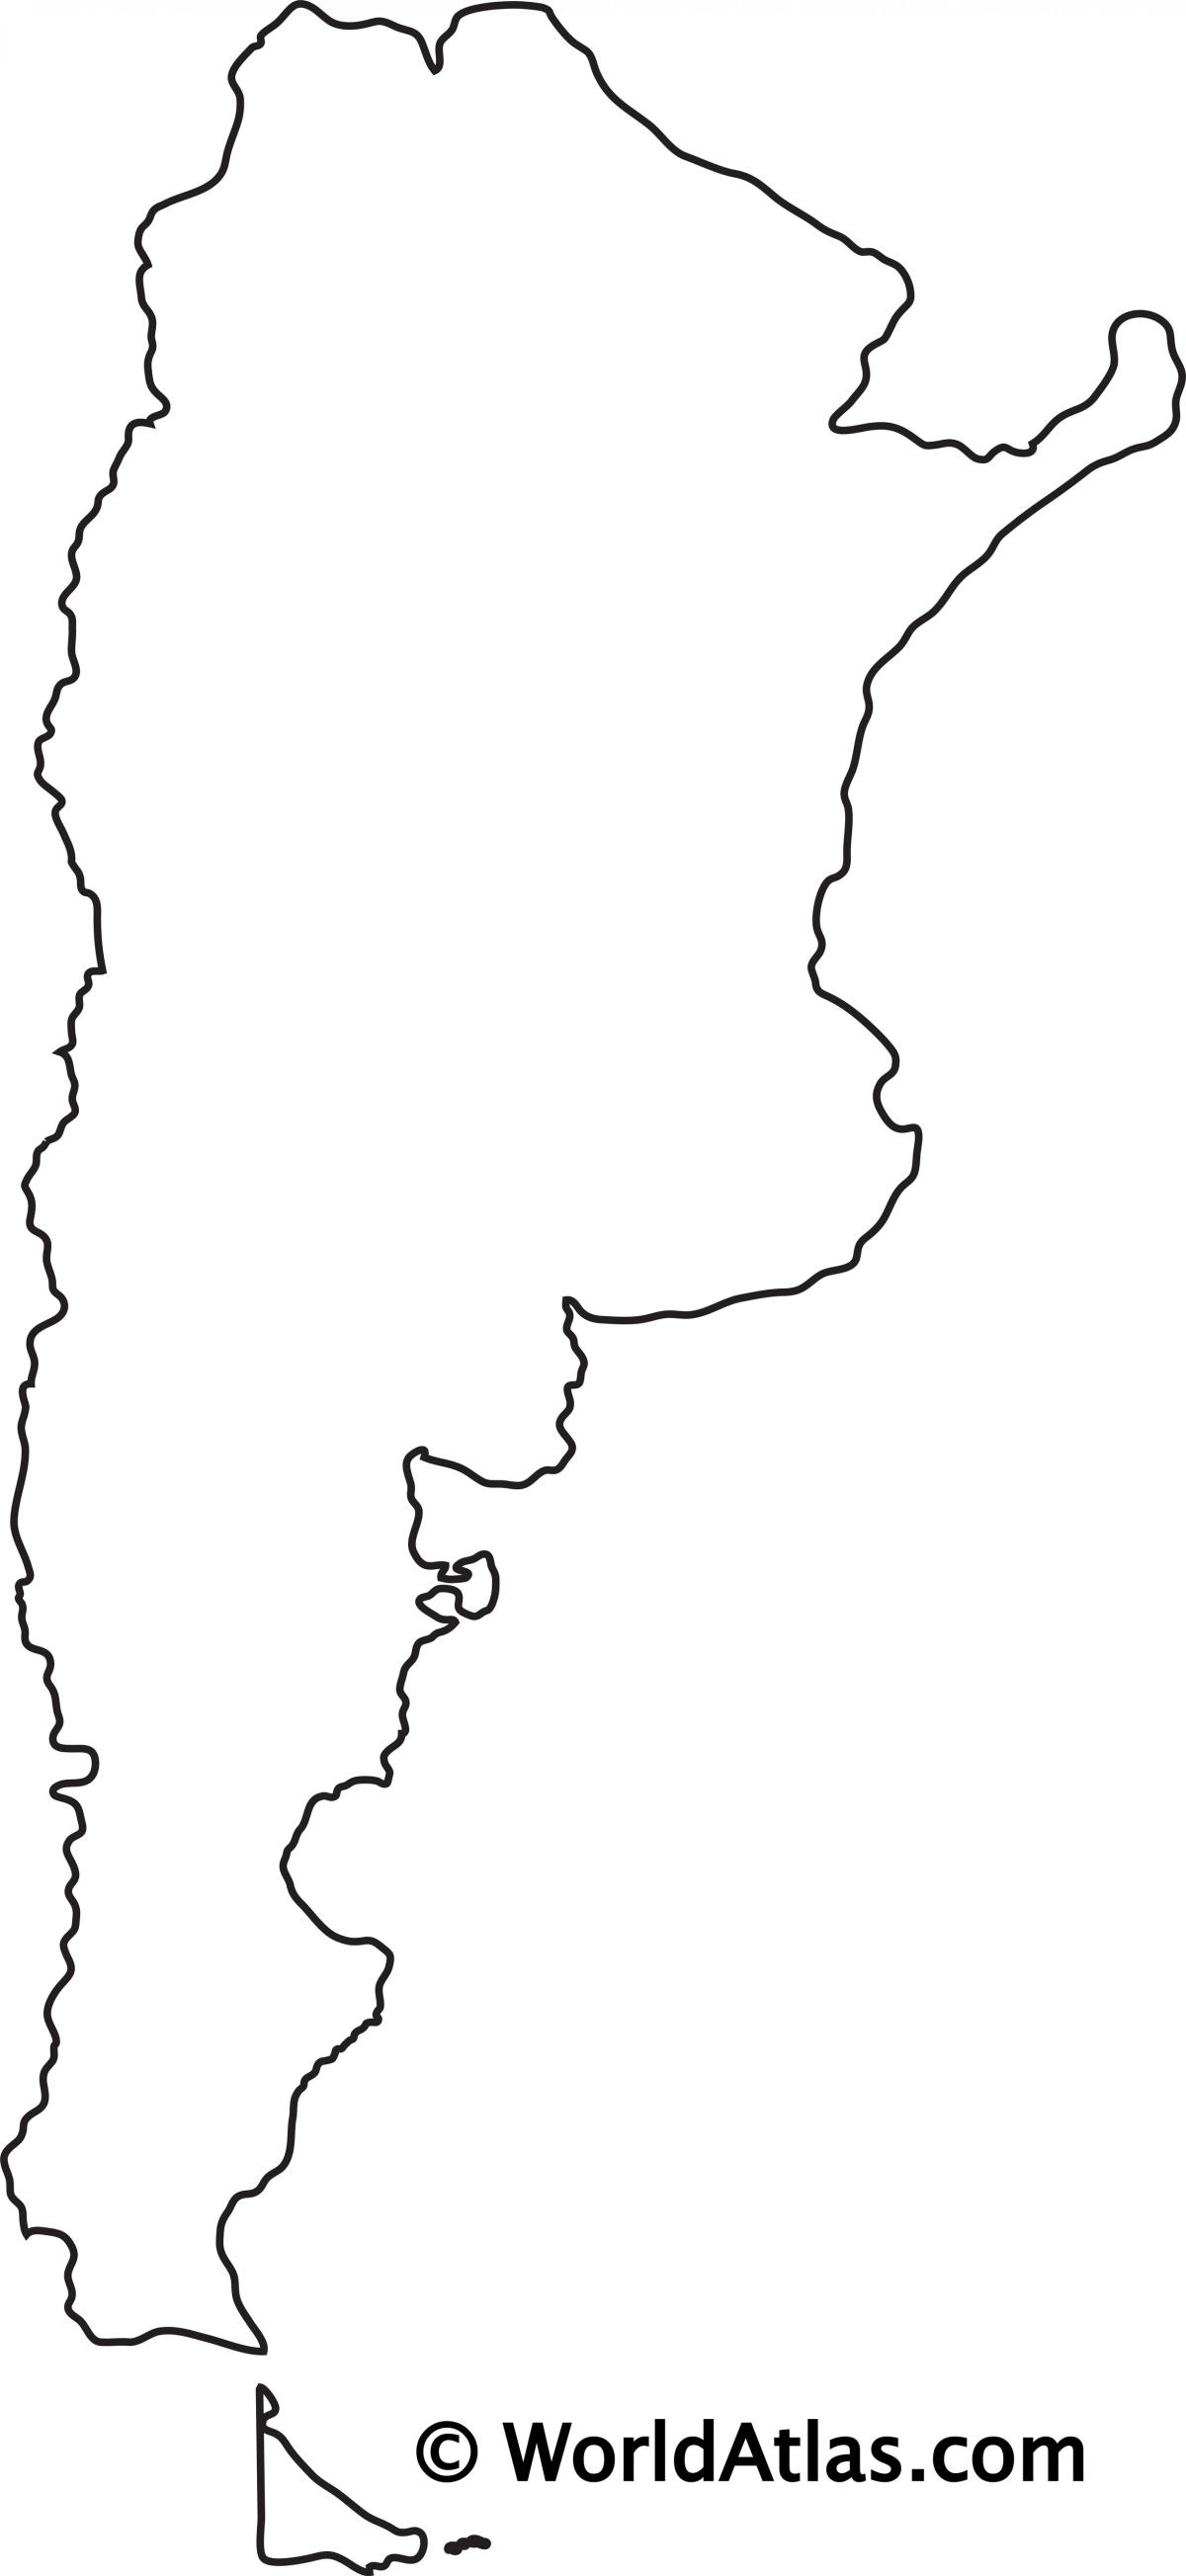 blank-map-of-argentina-outline-map-and-vector-map-of-argentina